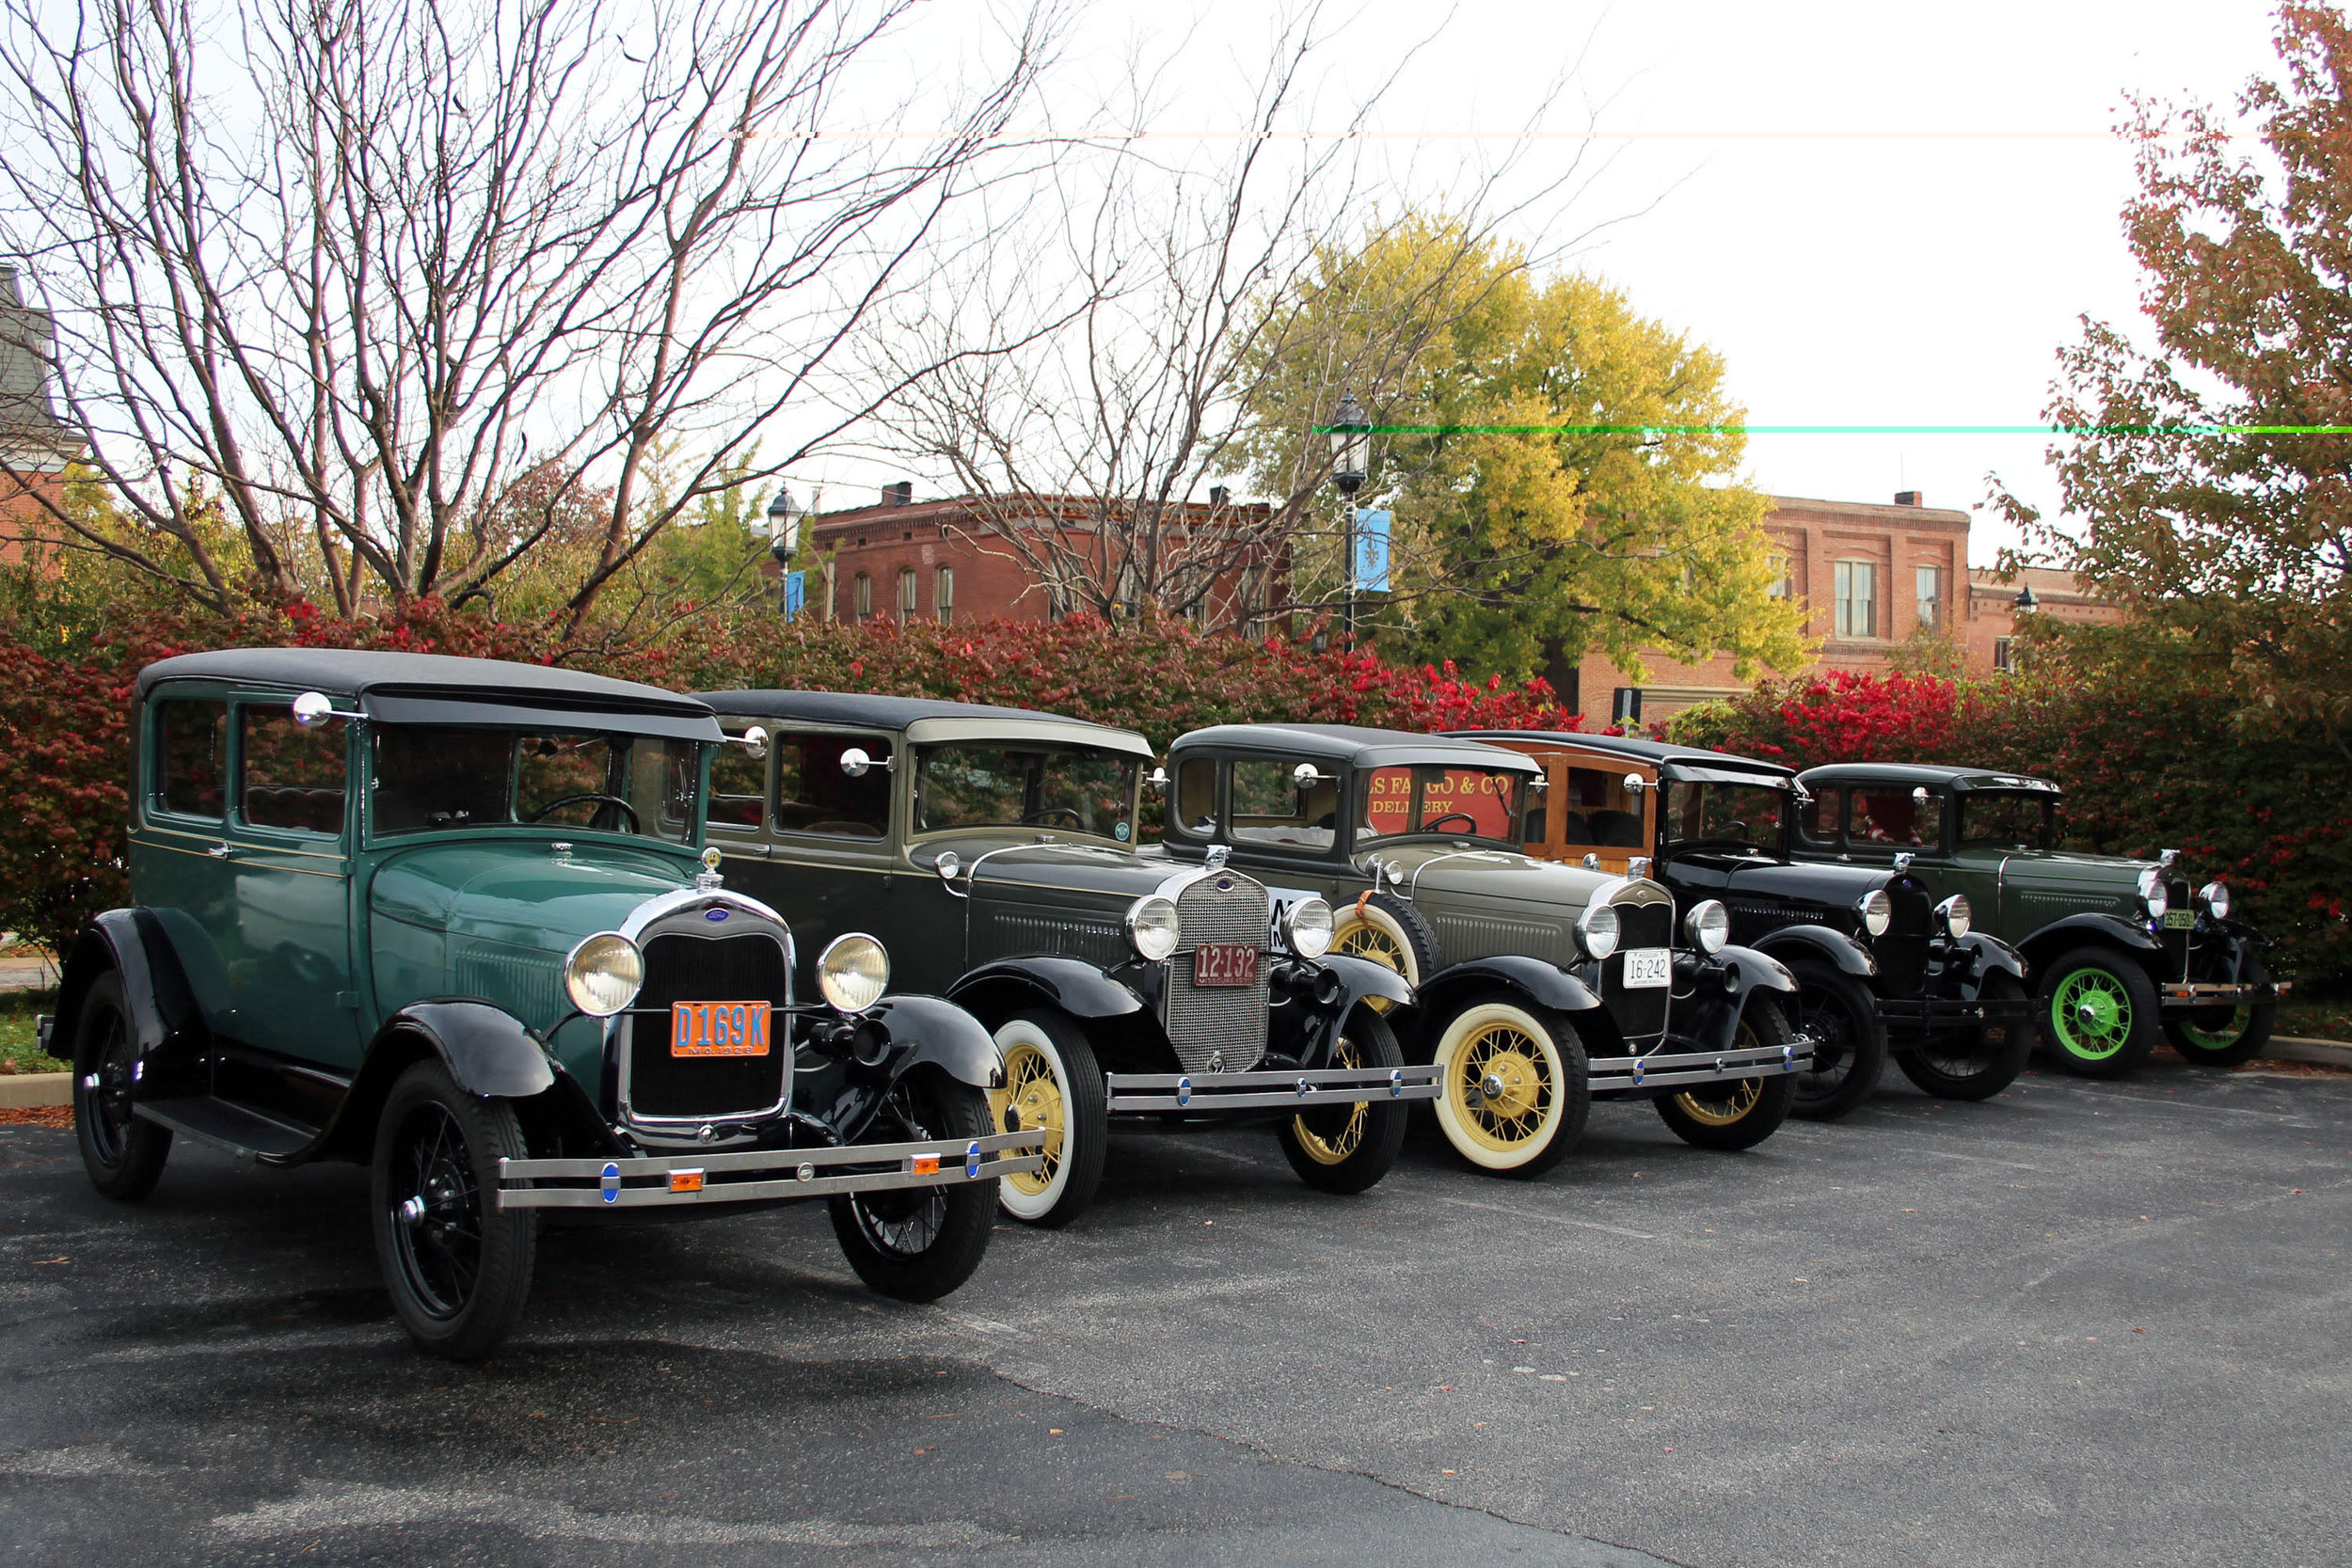   Five of the Model A's in front of Sqwires  